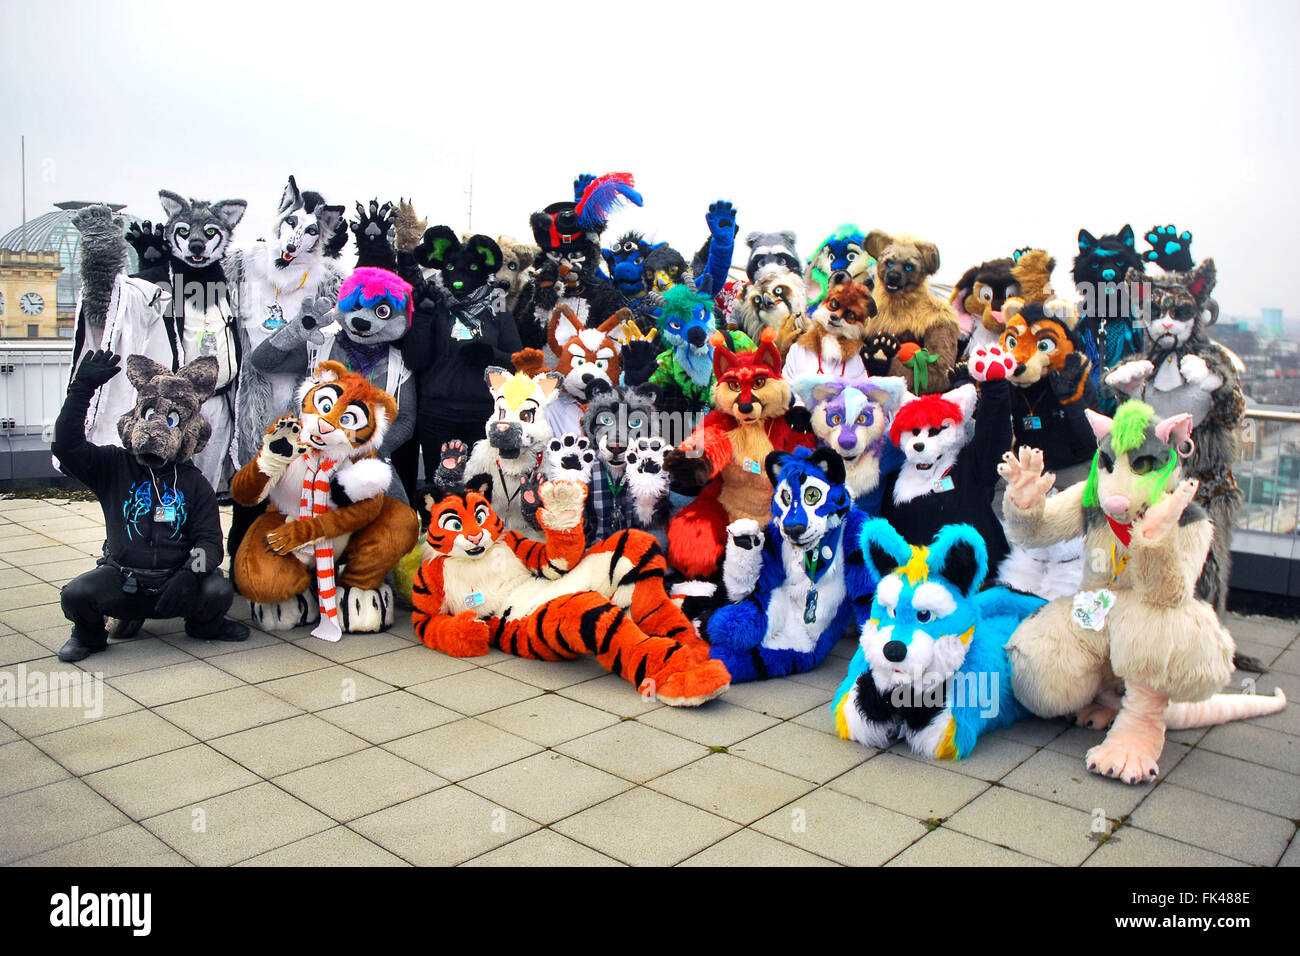 Furry fandom take part on a "Furry Walk" at the screening of the animated  movie "Zoomania" in Dresden, Germany. On March 05, 2016./picture alliance  Stock Photo - Alamy